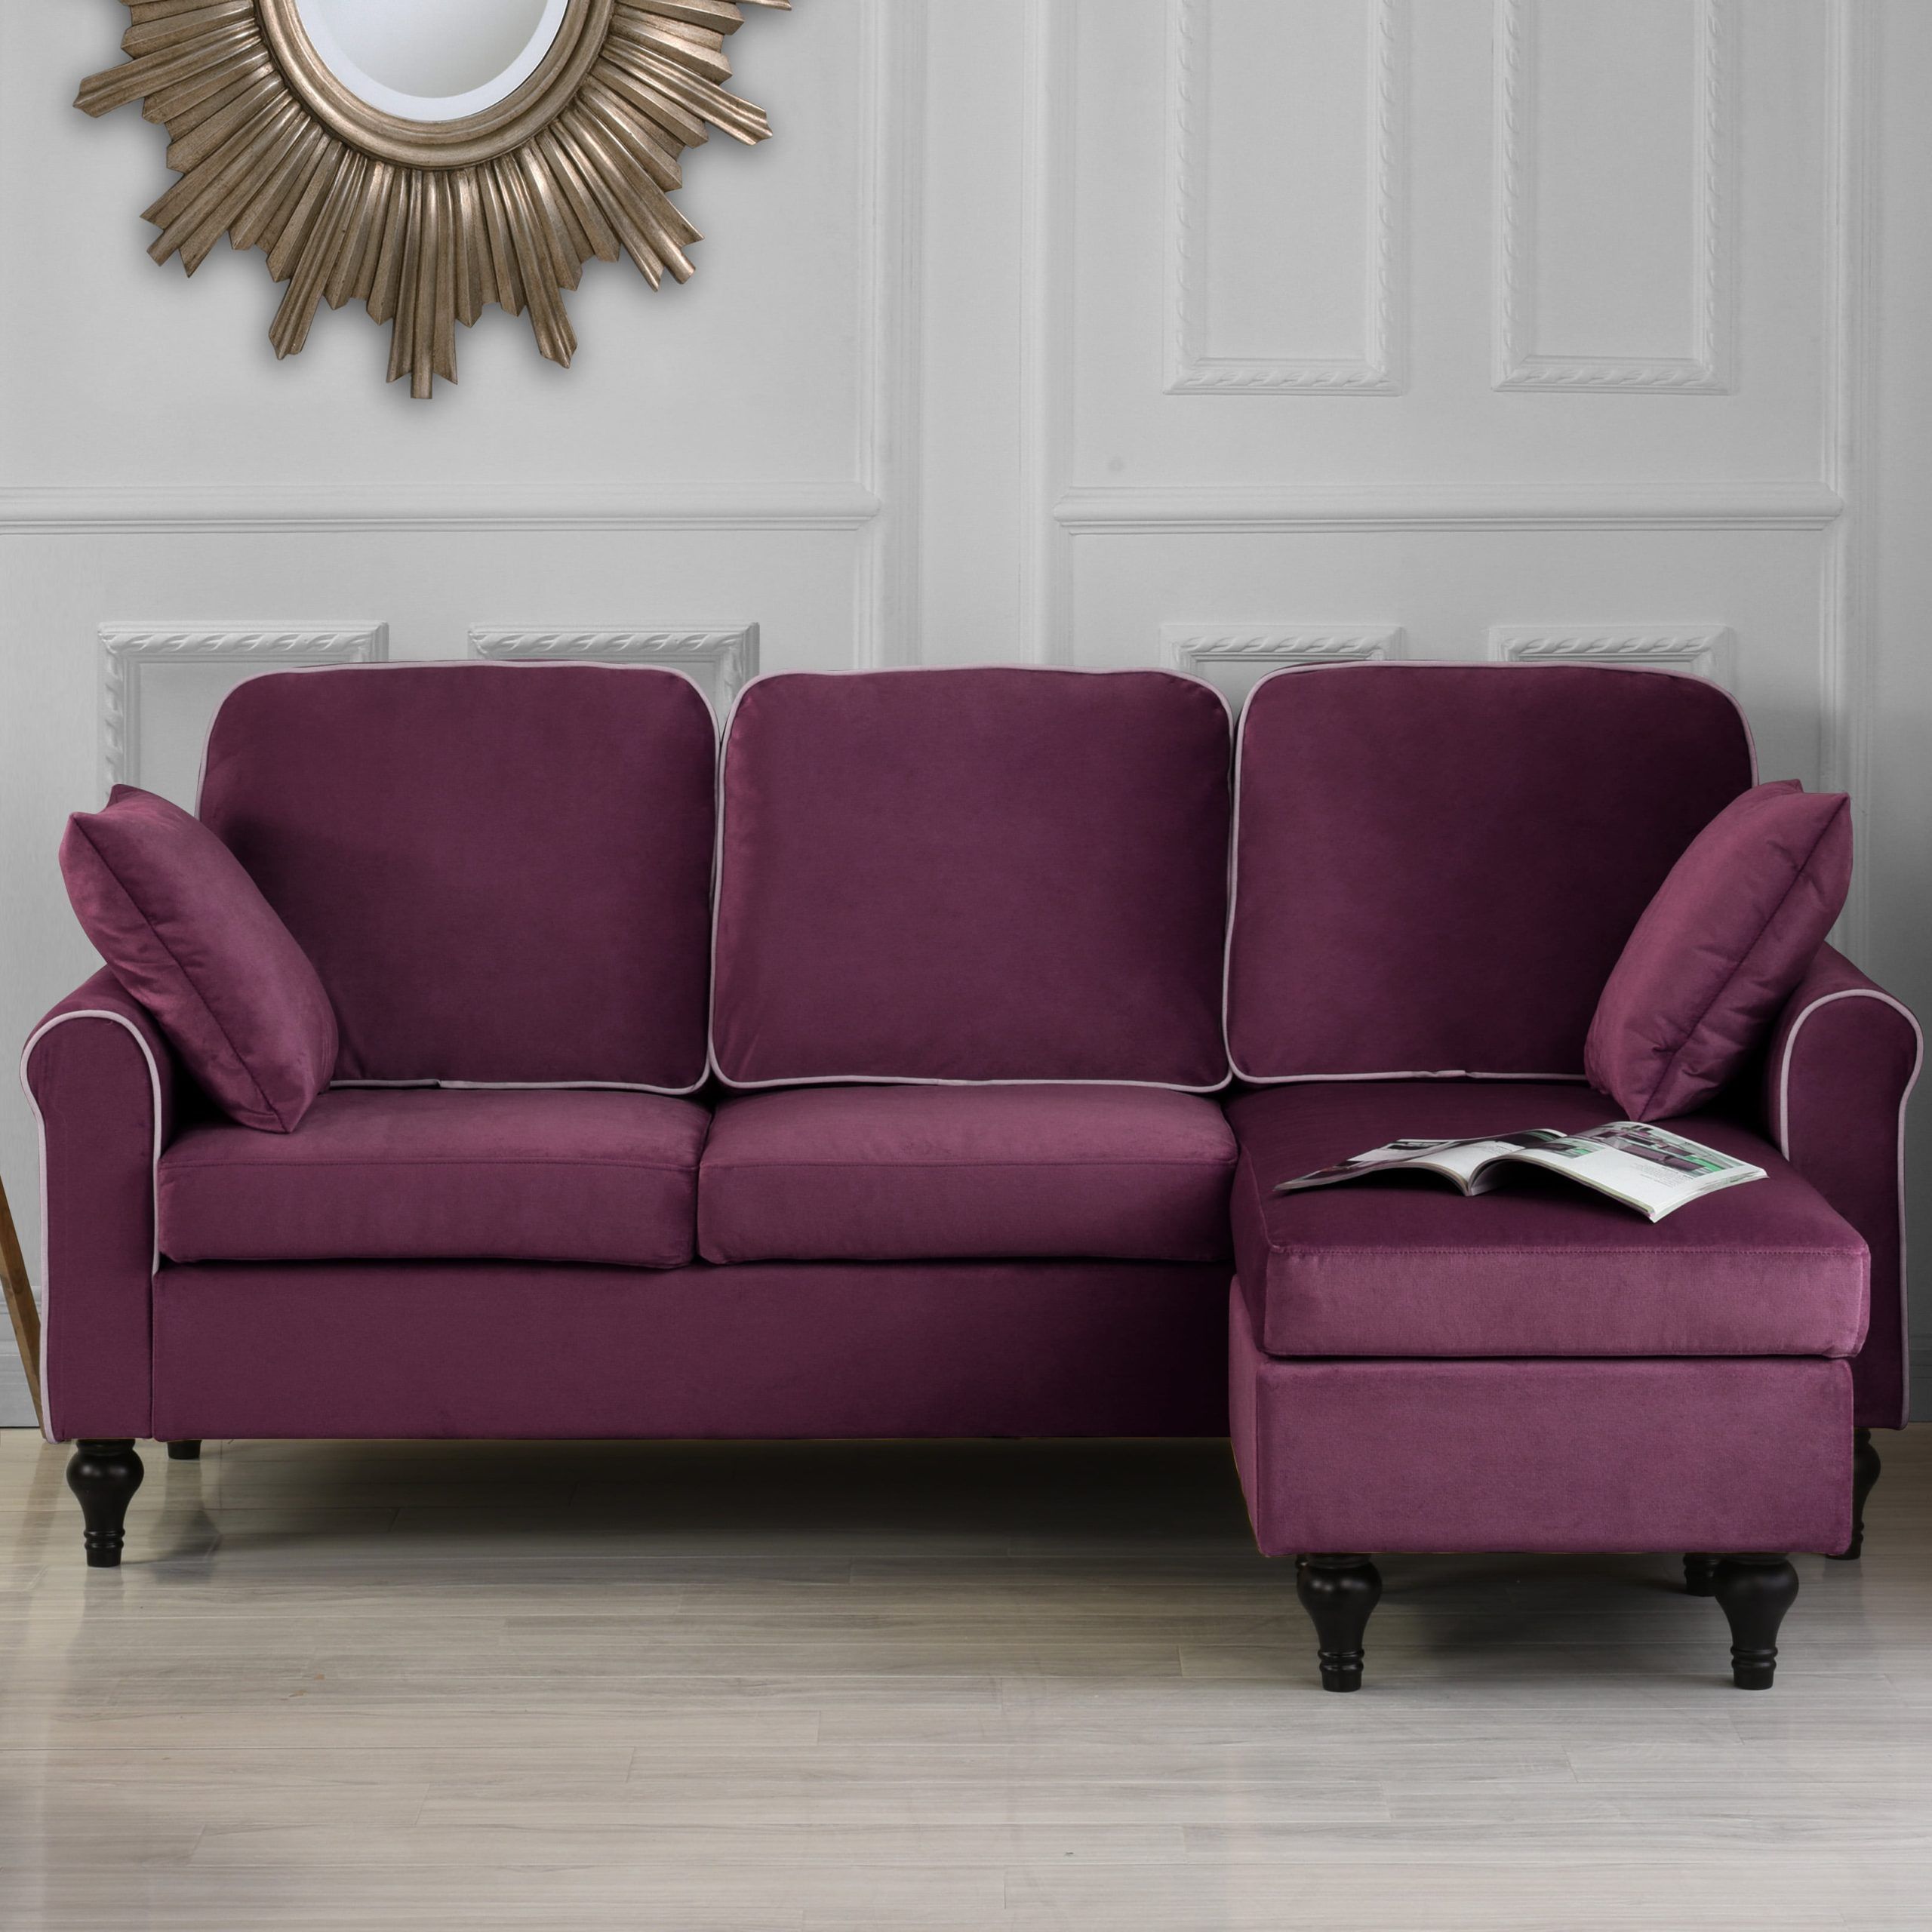 2017 Classic And Traditional Small Space Velvet Sectional Sofa With Within Small Love Seats In Velvet (View 9 of 15)